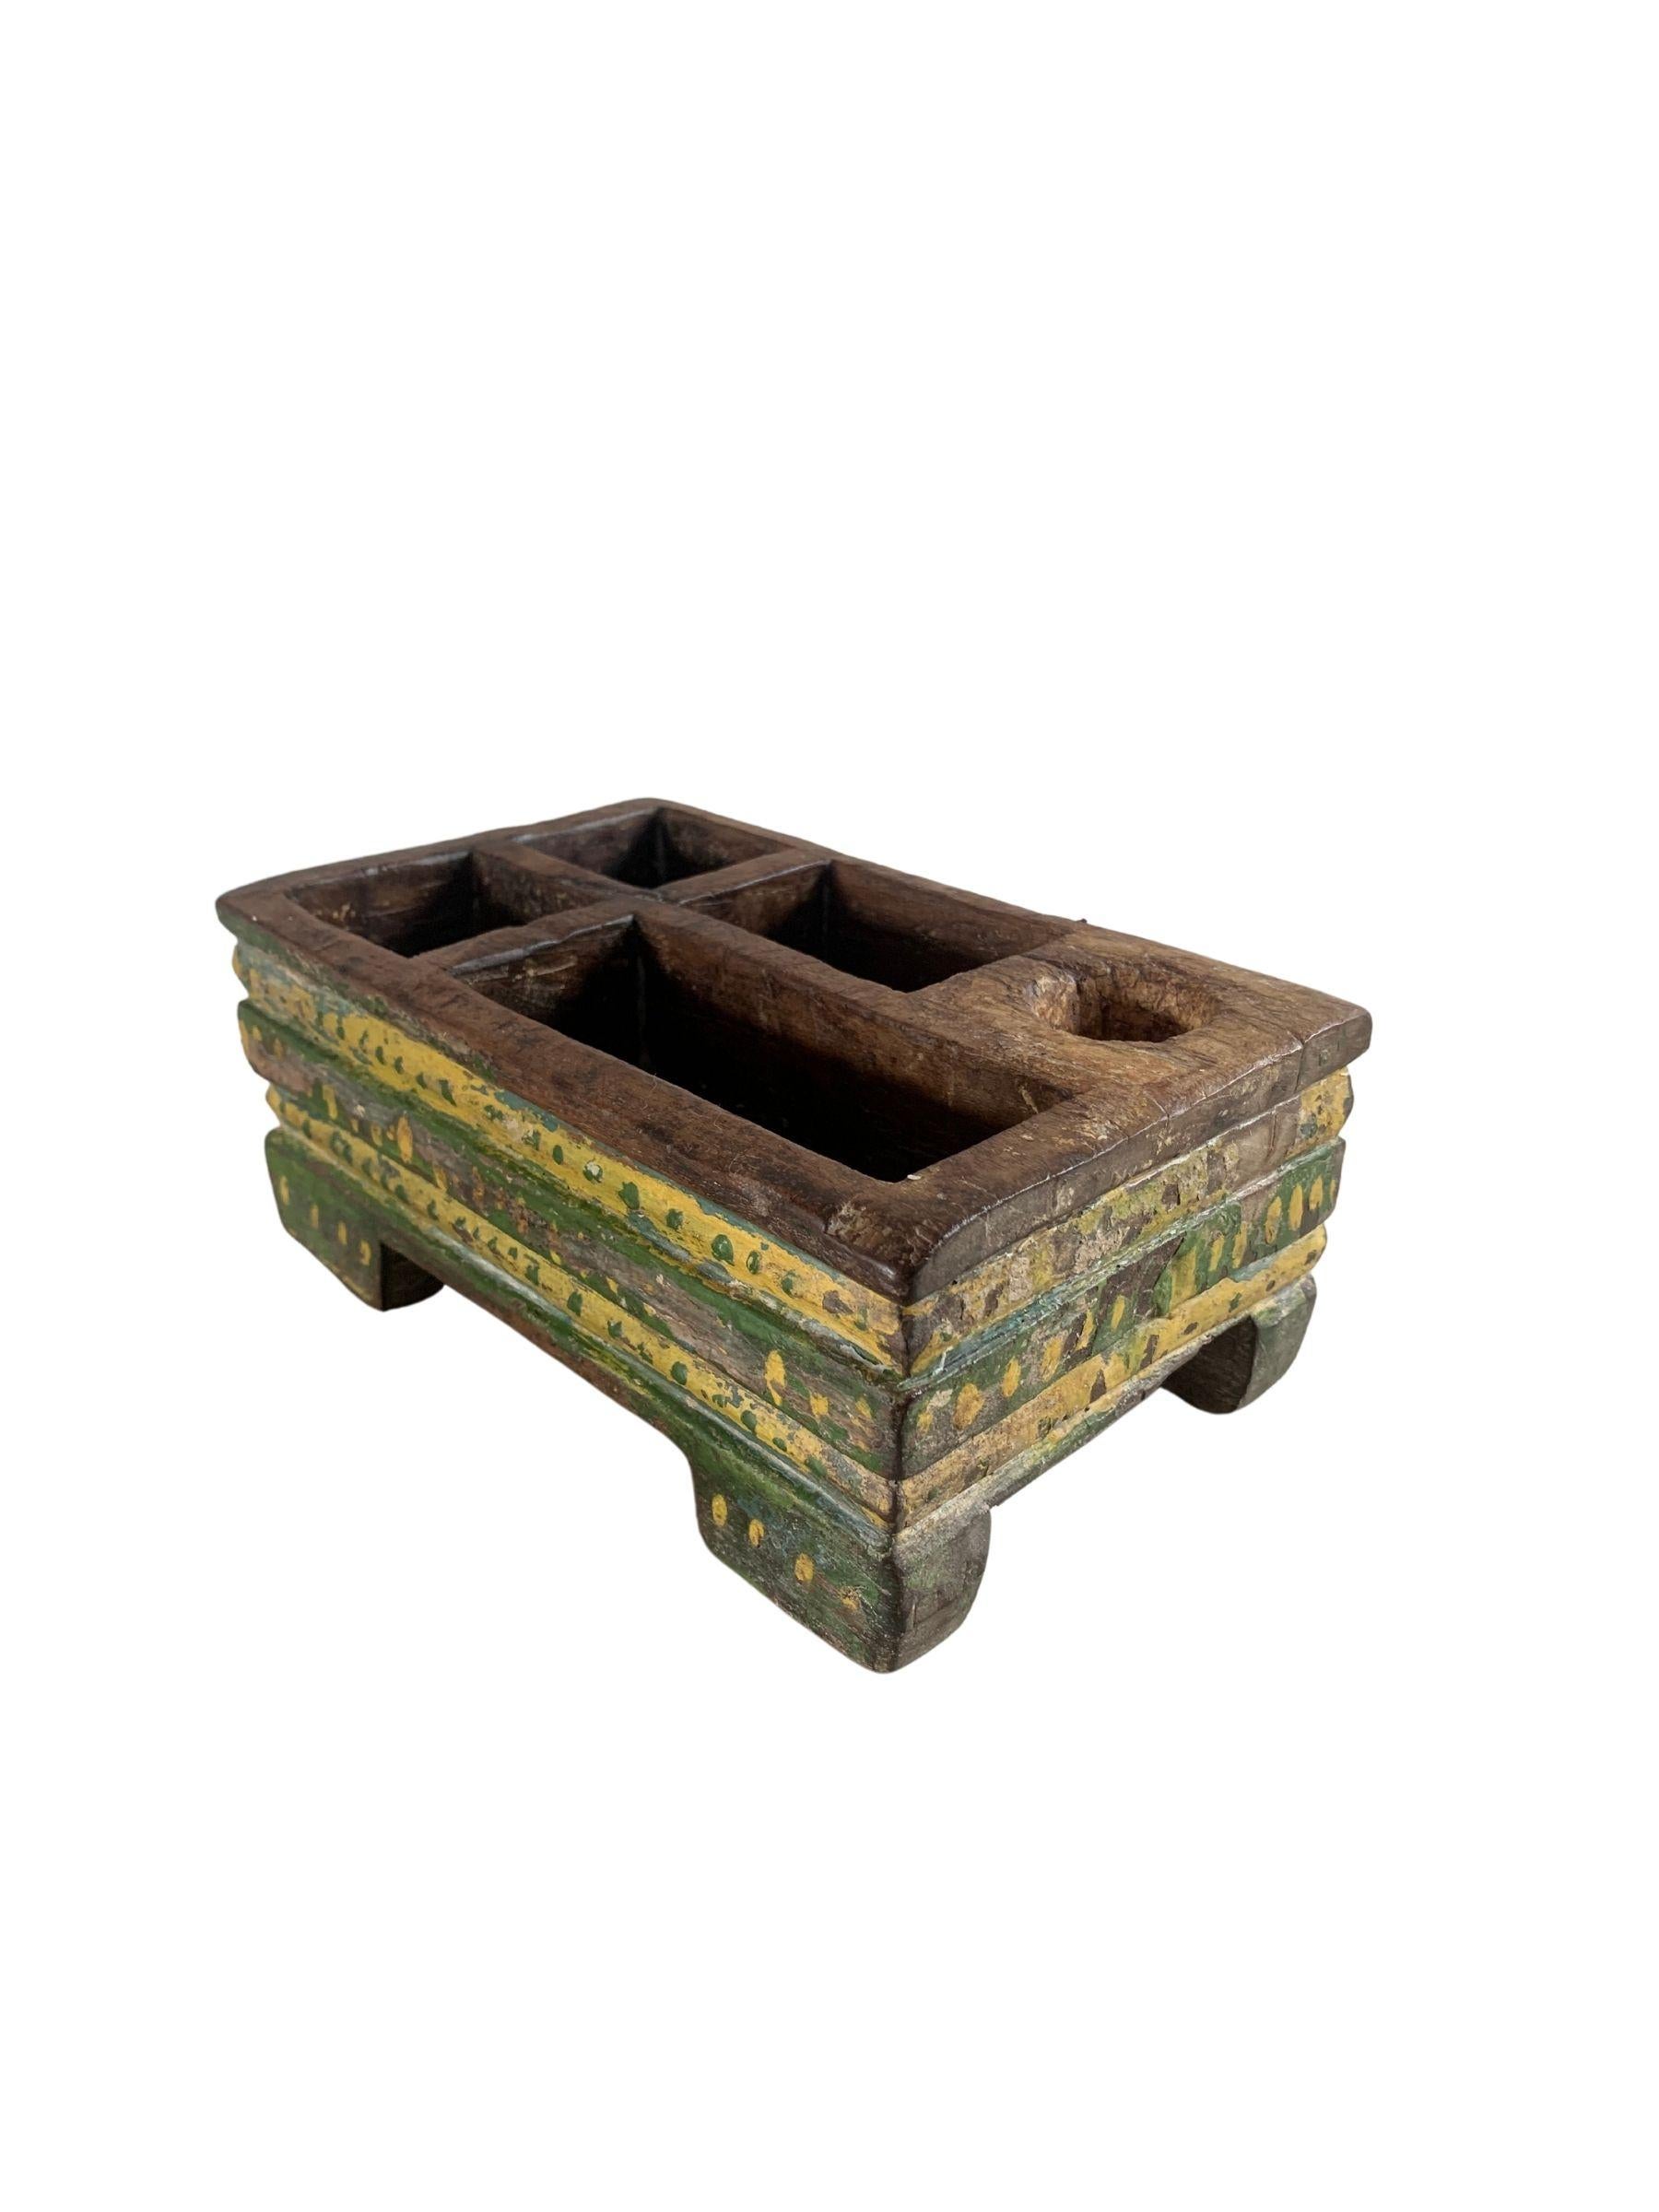 Hand-Carved Betel Nut Box from Java with Polychromed Finish, Indonesia, c. 1900 For Sale